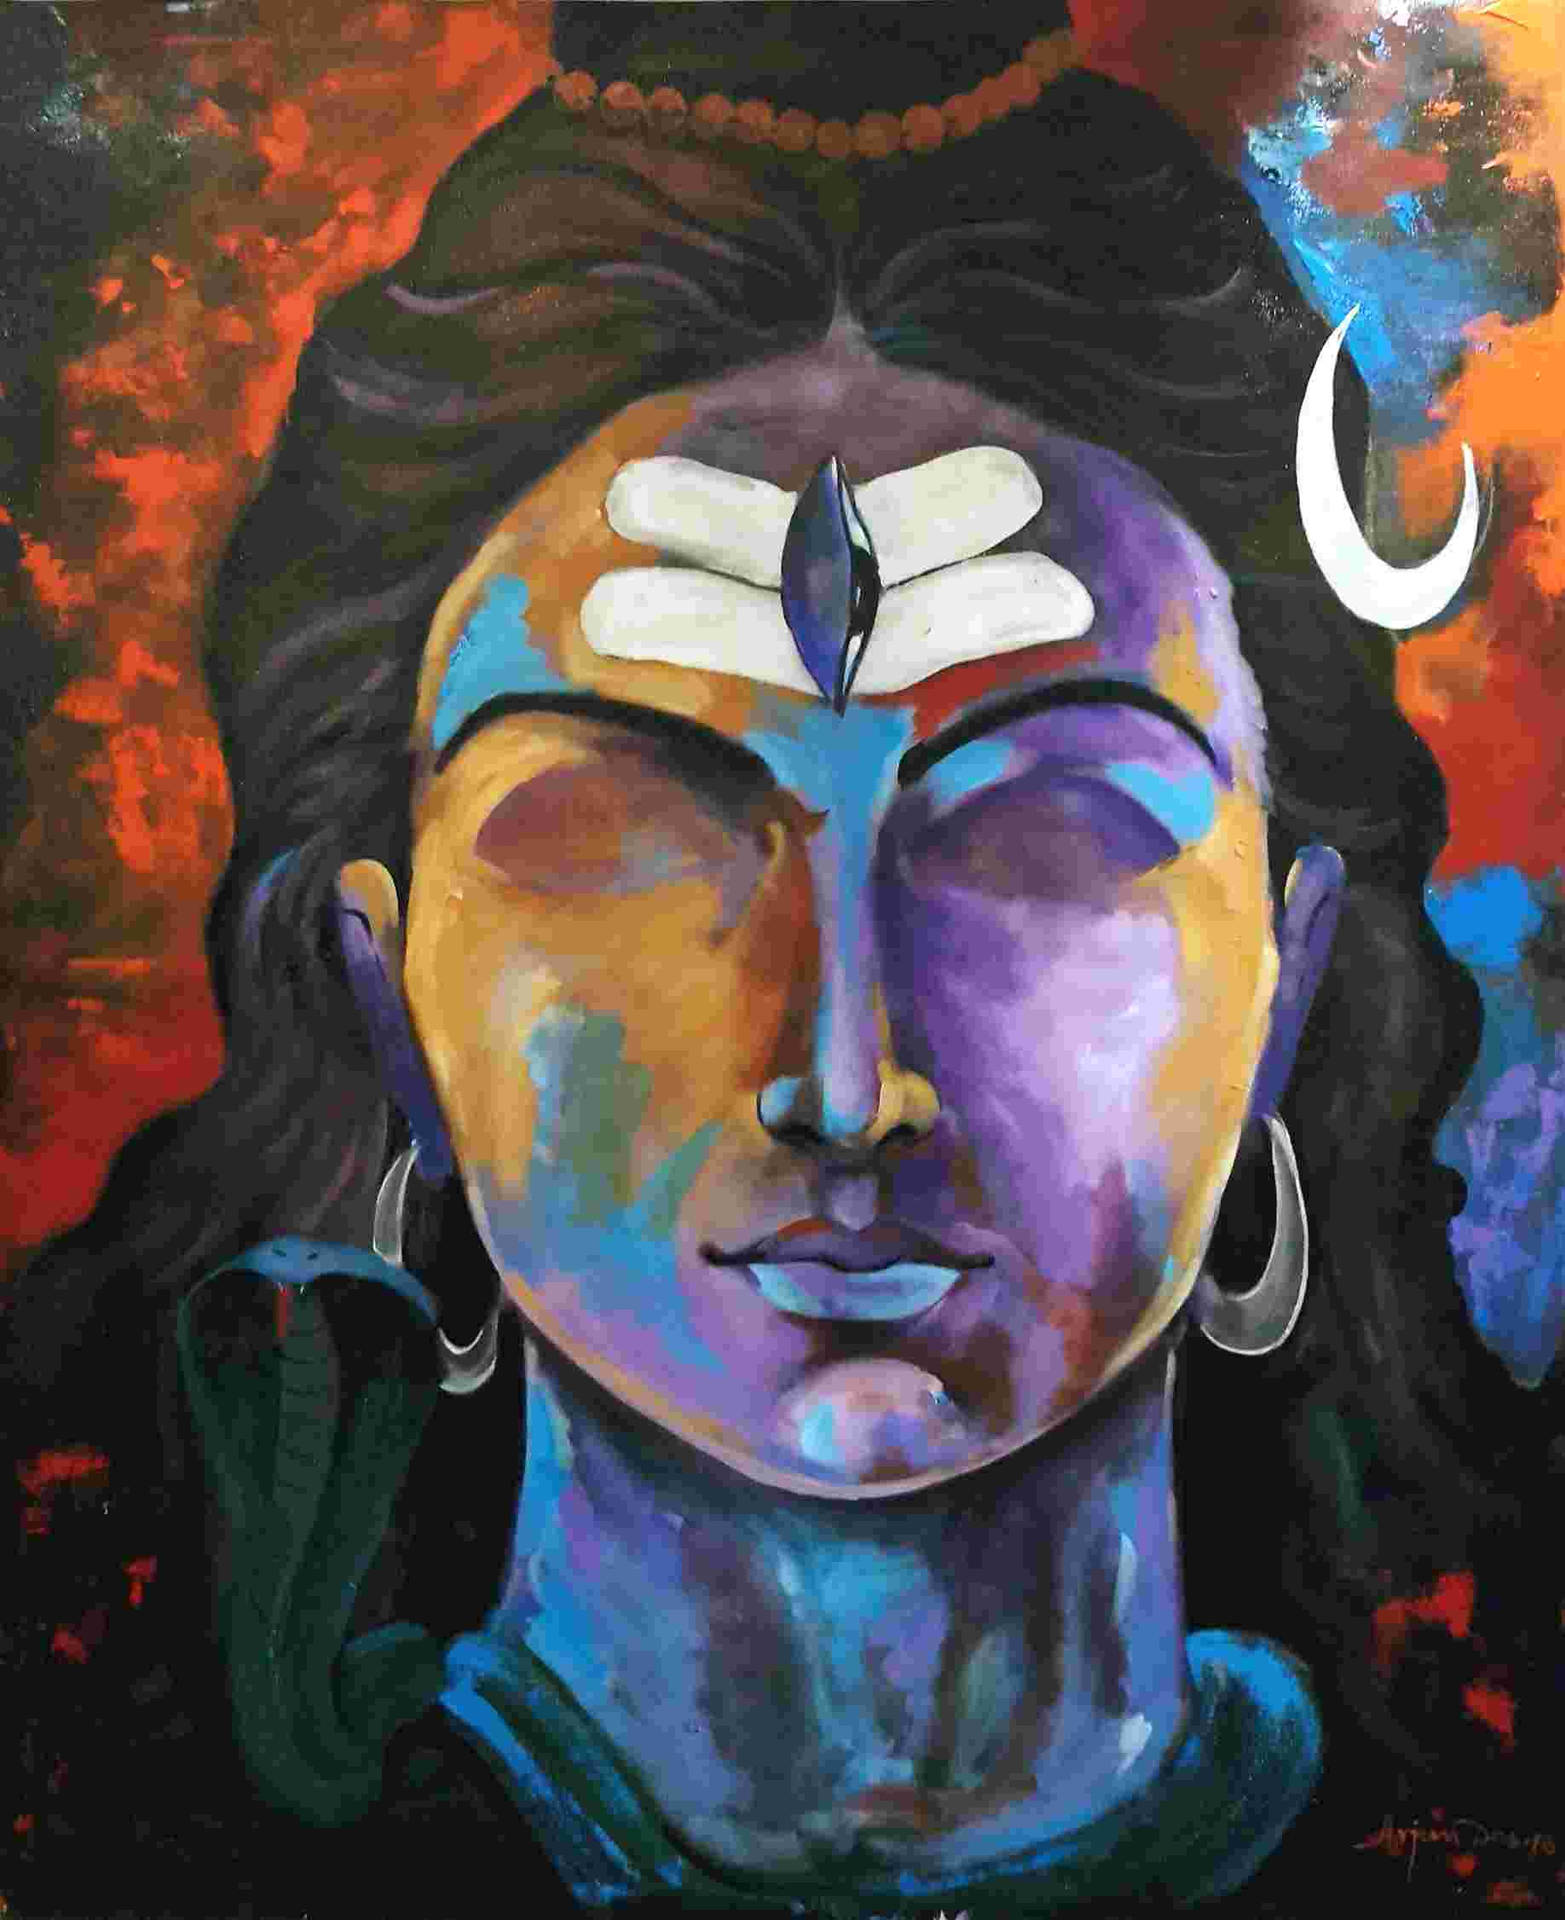 Lord Shiva Drawing with Oil Pastels step by step for beginners - YouTube